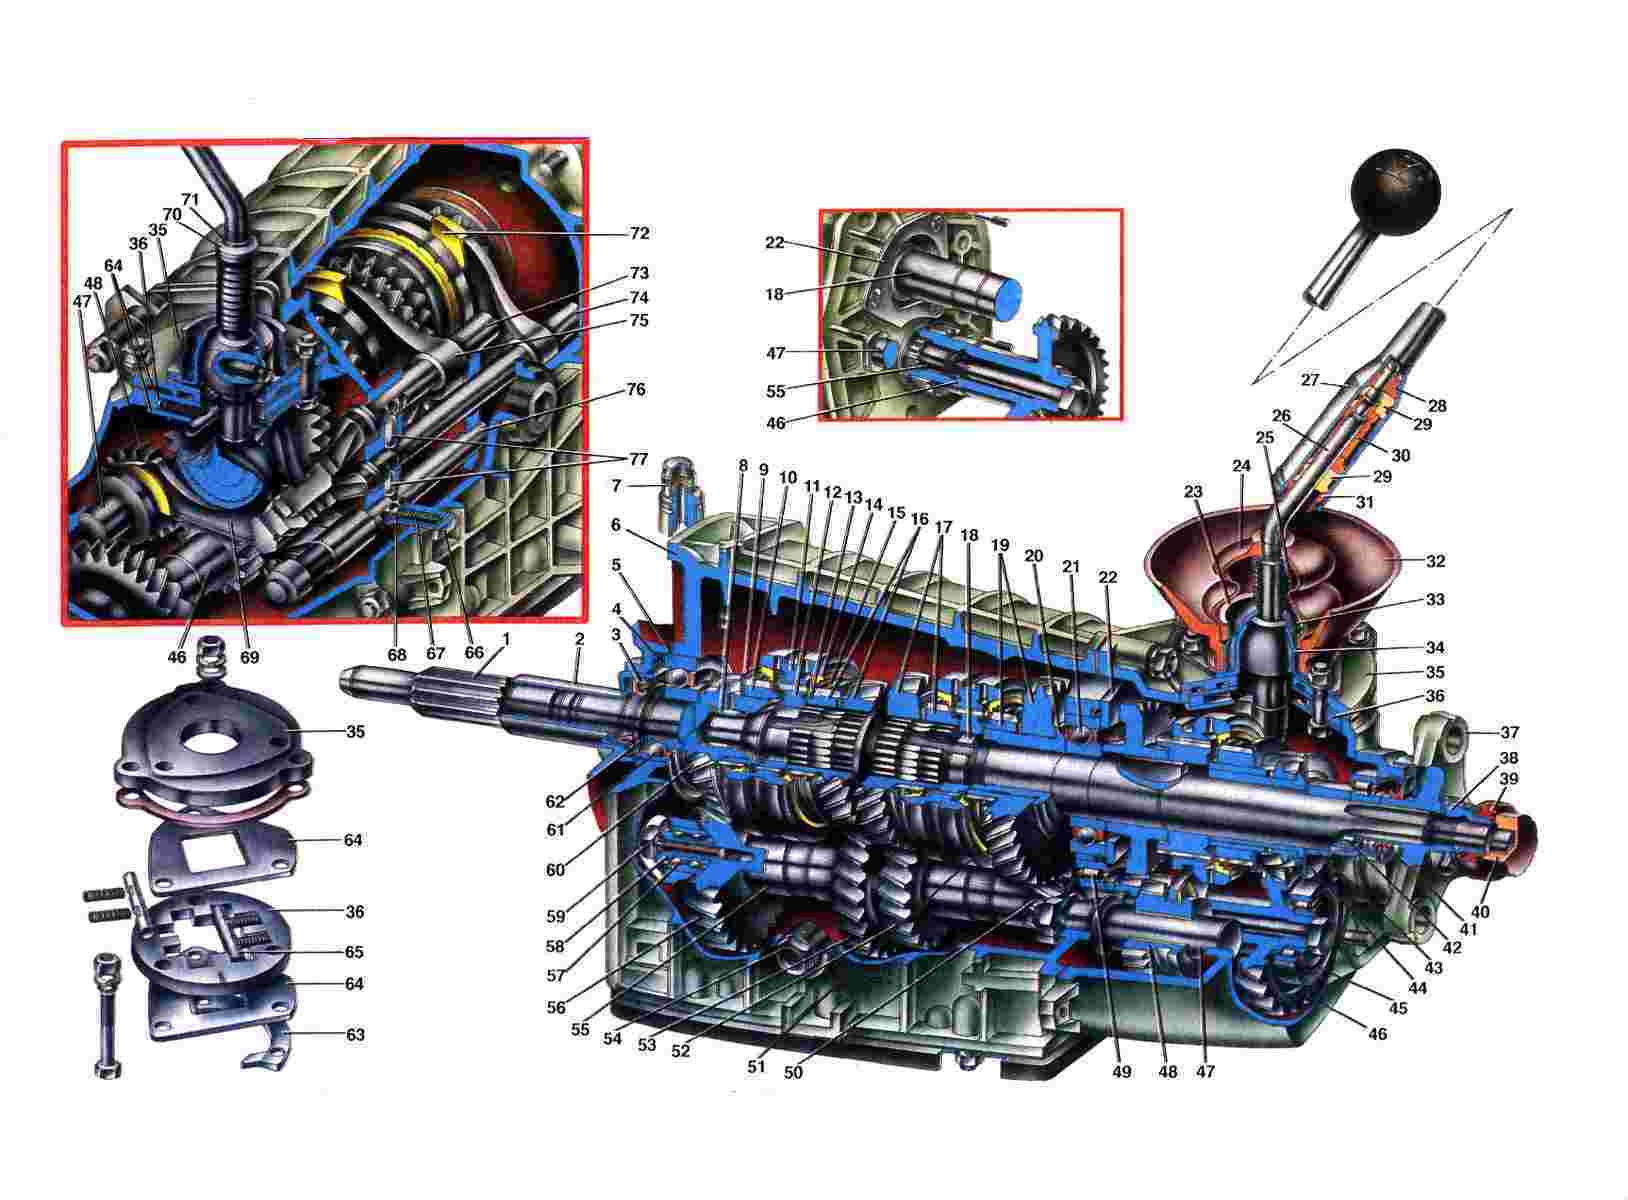 Features of the gearbox for the Niva car